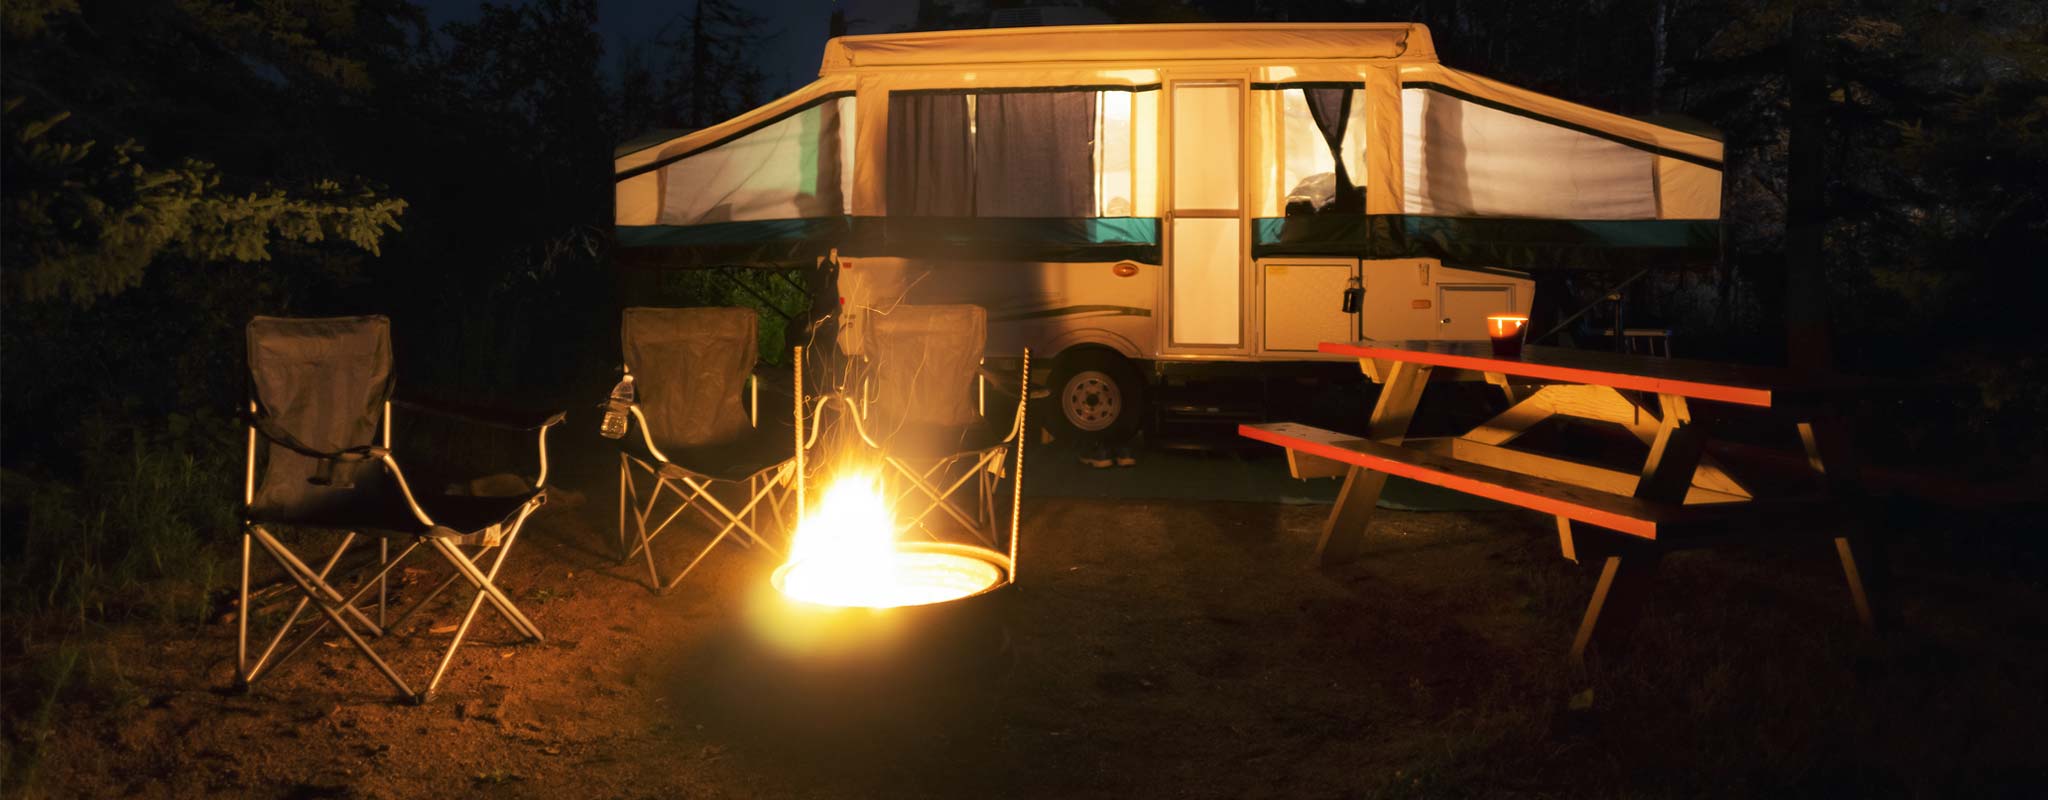 A pop-up tent trailer with it's lights on next to a campfire.